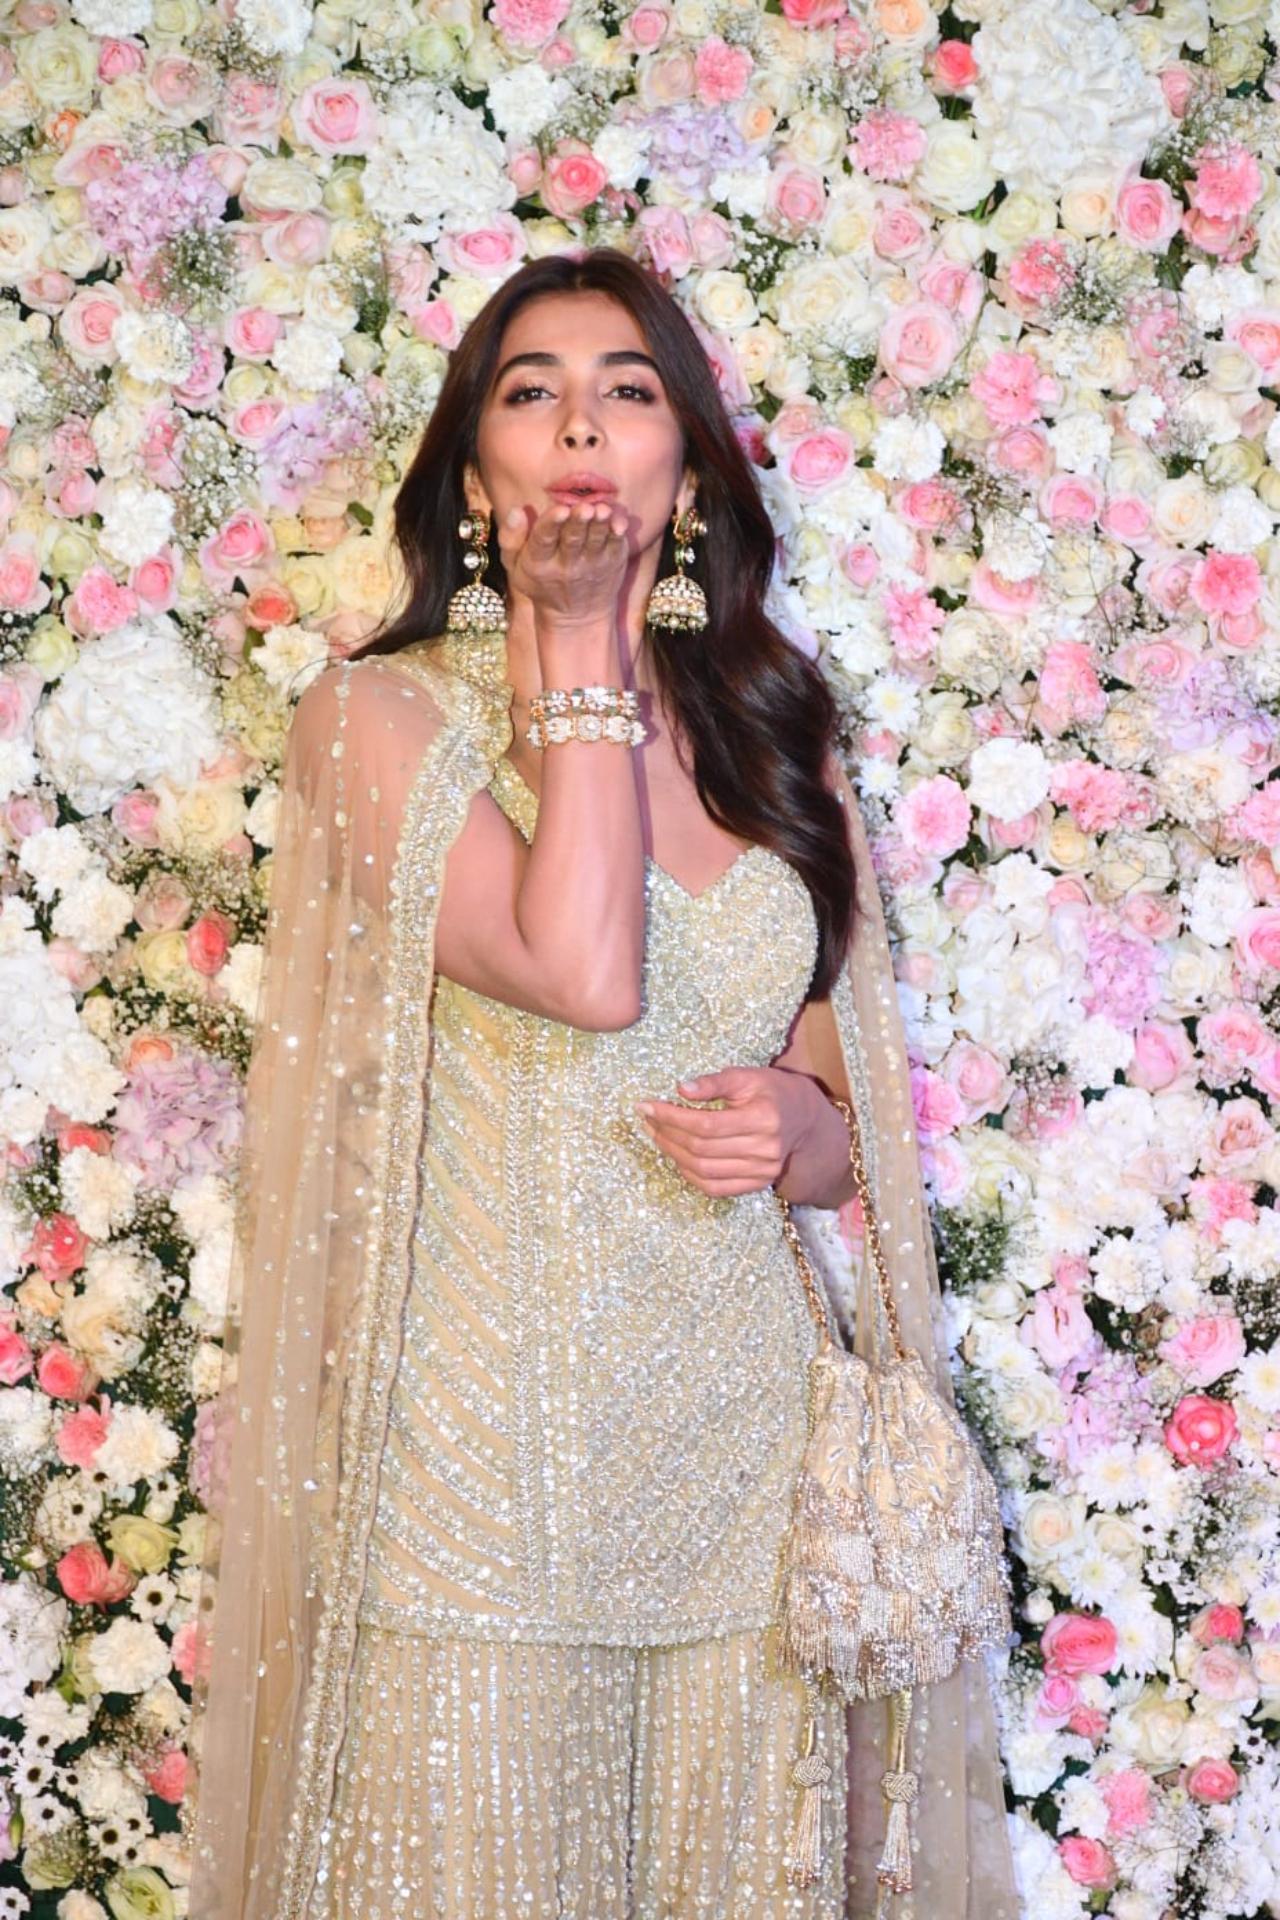 Pooja Hegde gave a flying kiss to the paps as she arrived for the party. She stunned in a green Indian wear